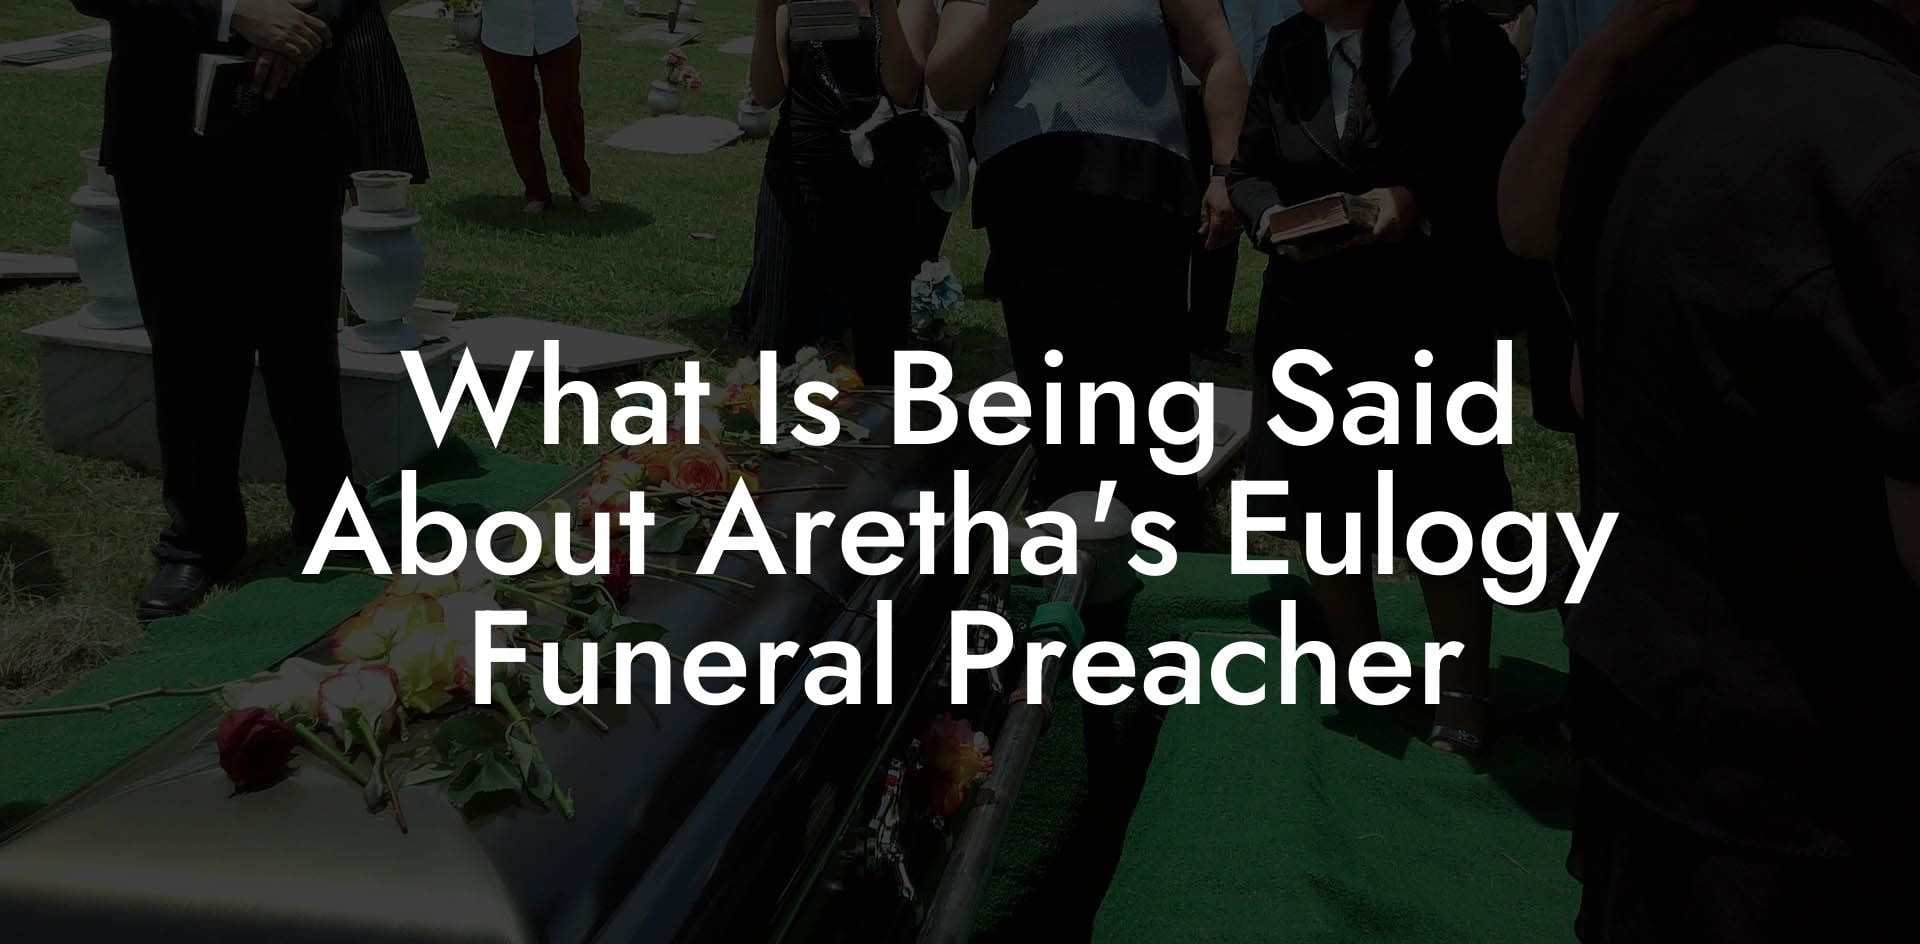 What Is Being Said About Aretha's Eulogy Funeral Preacher